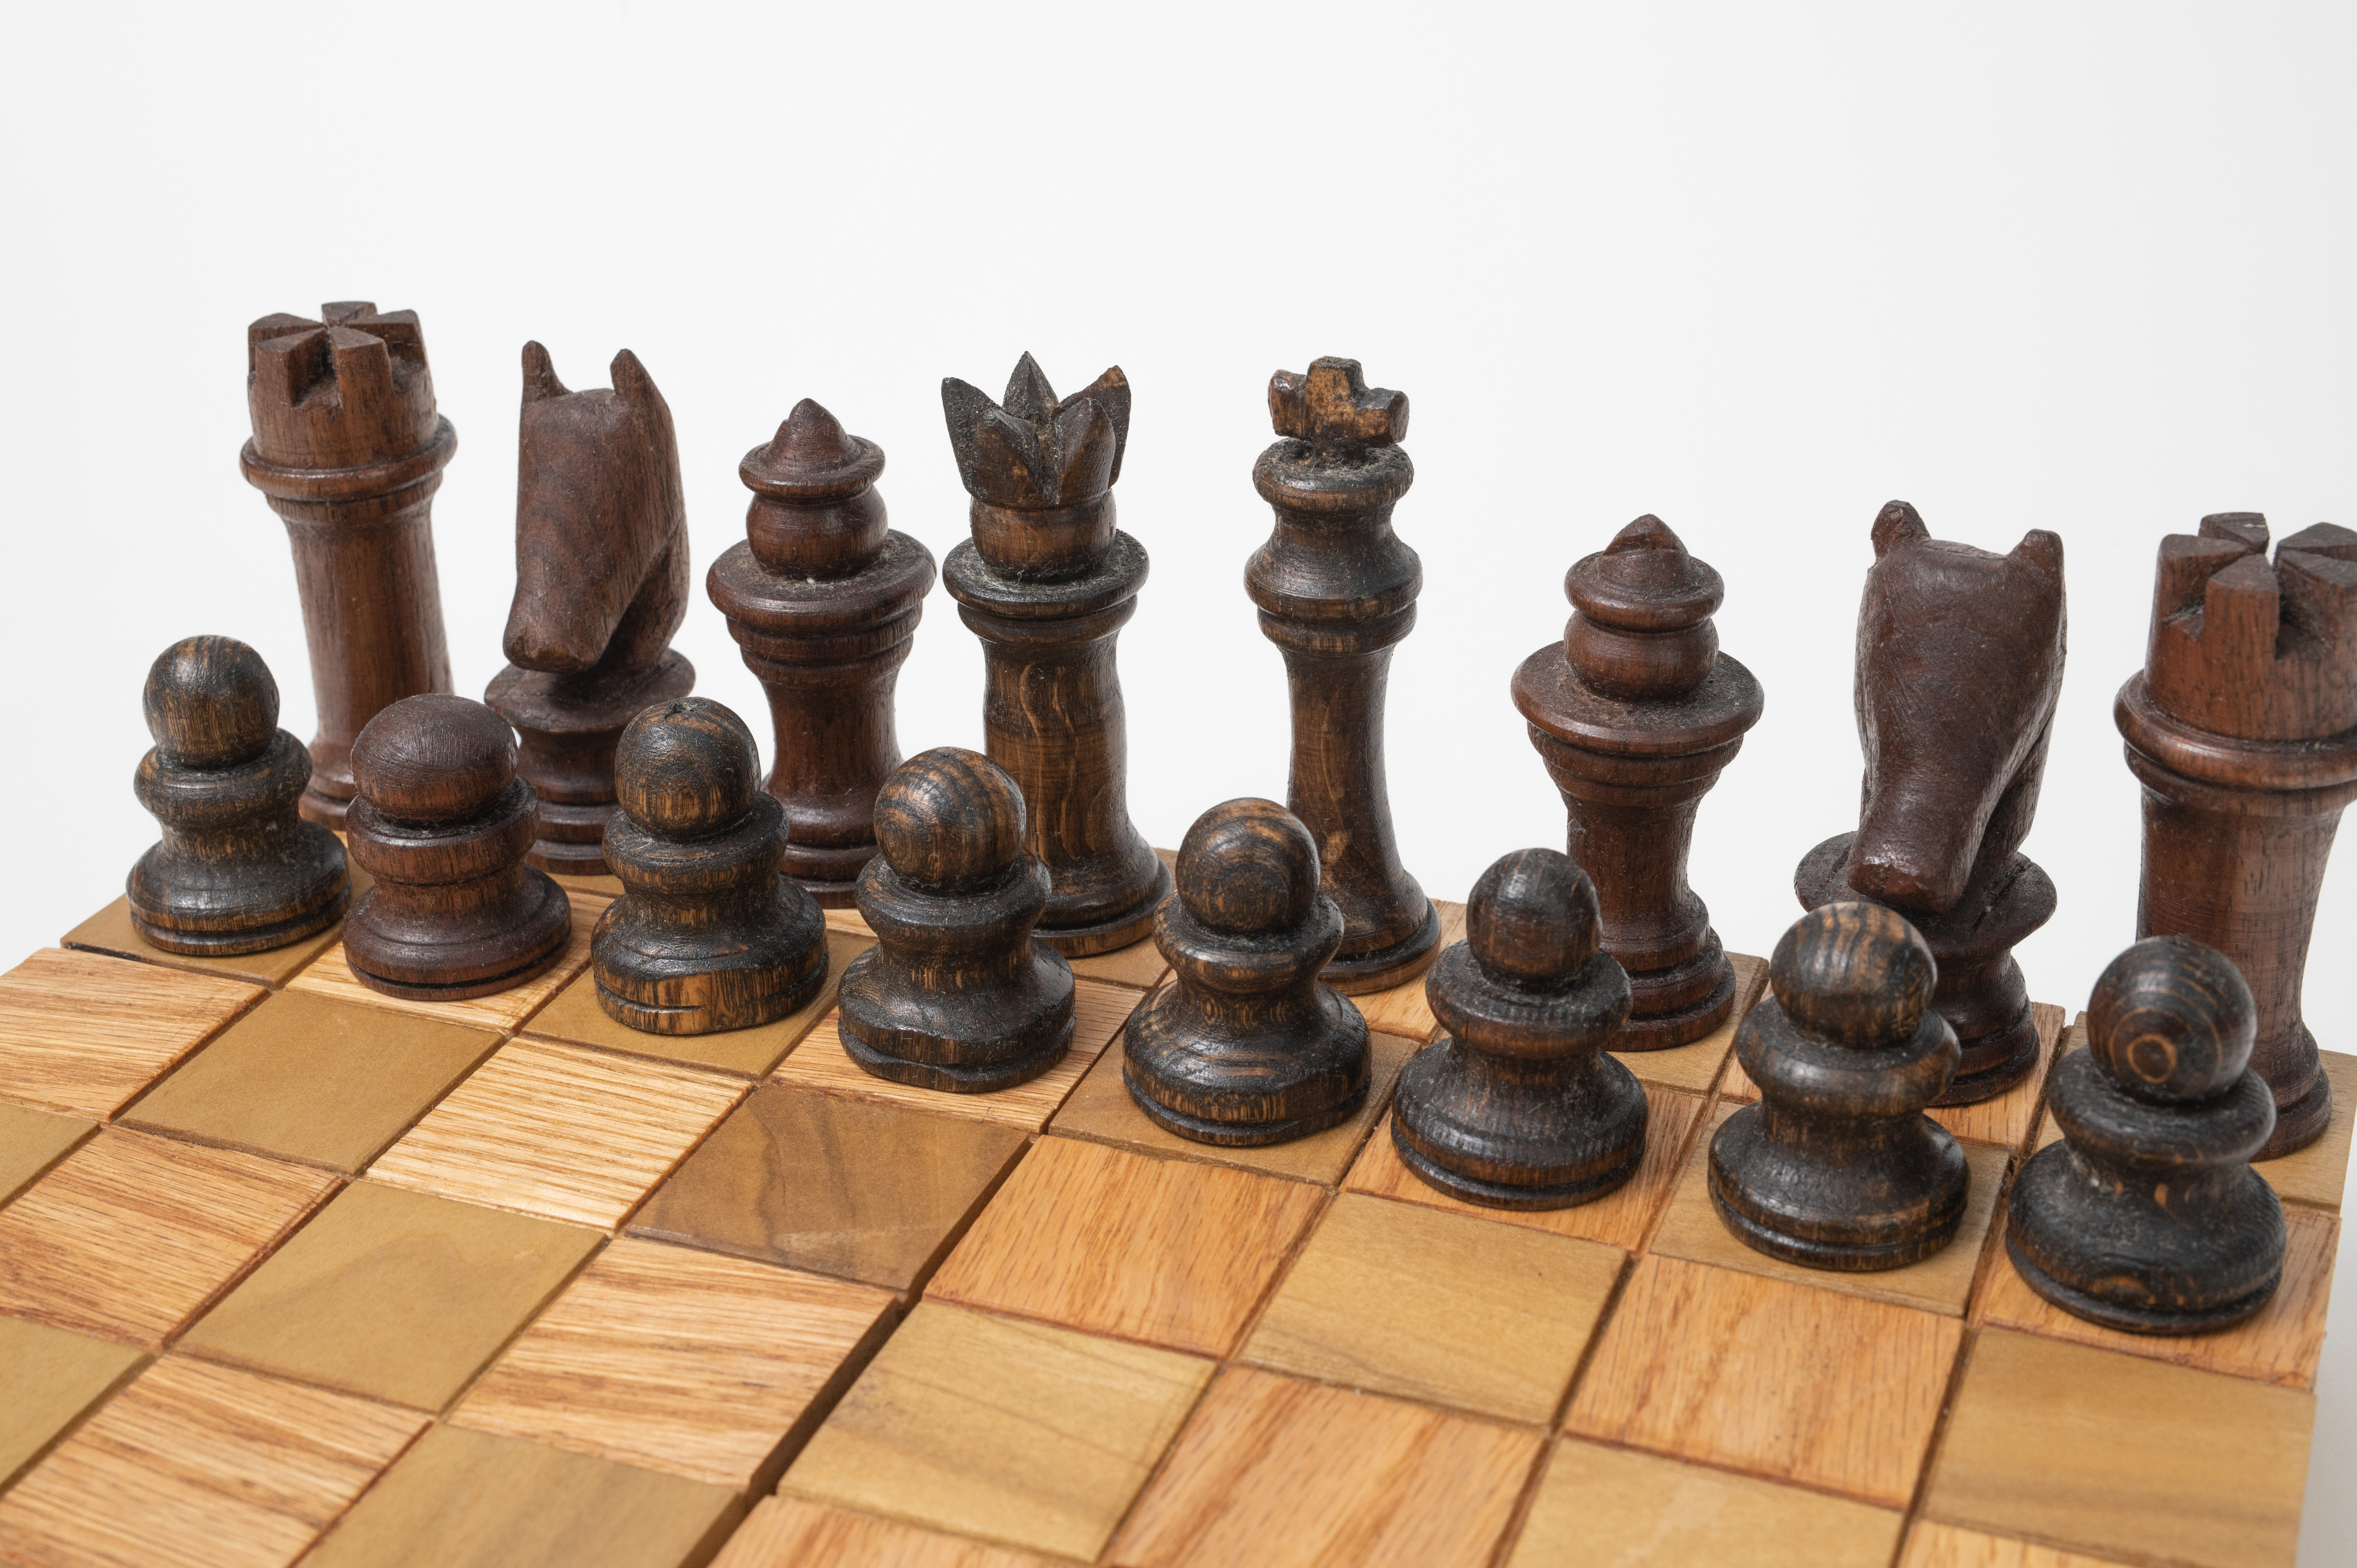 1972 FIDE Commemorative Chess Set – World Chess Hall of Fame